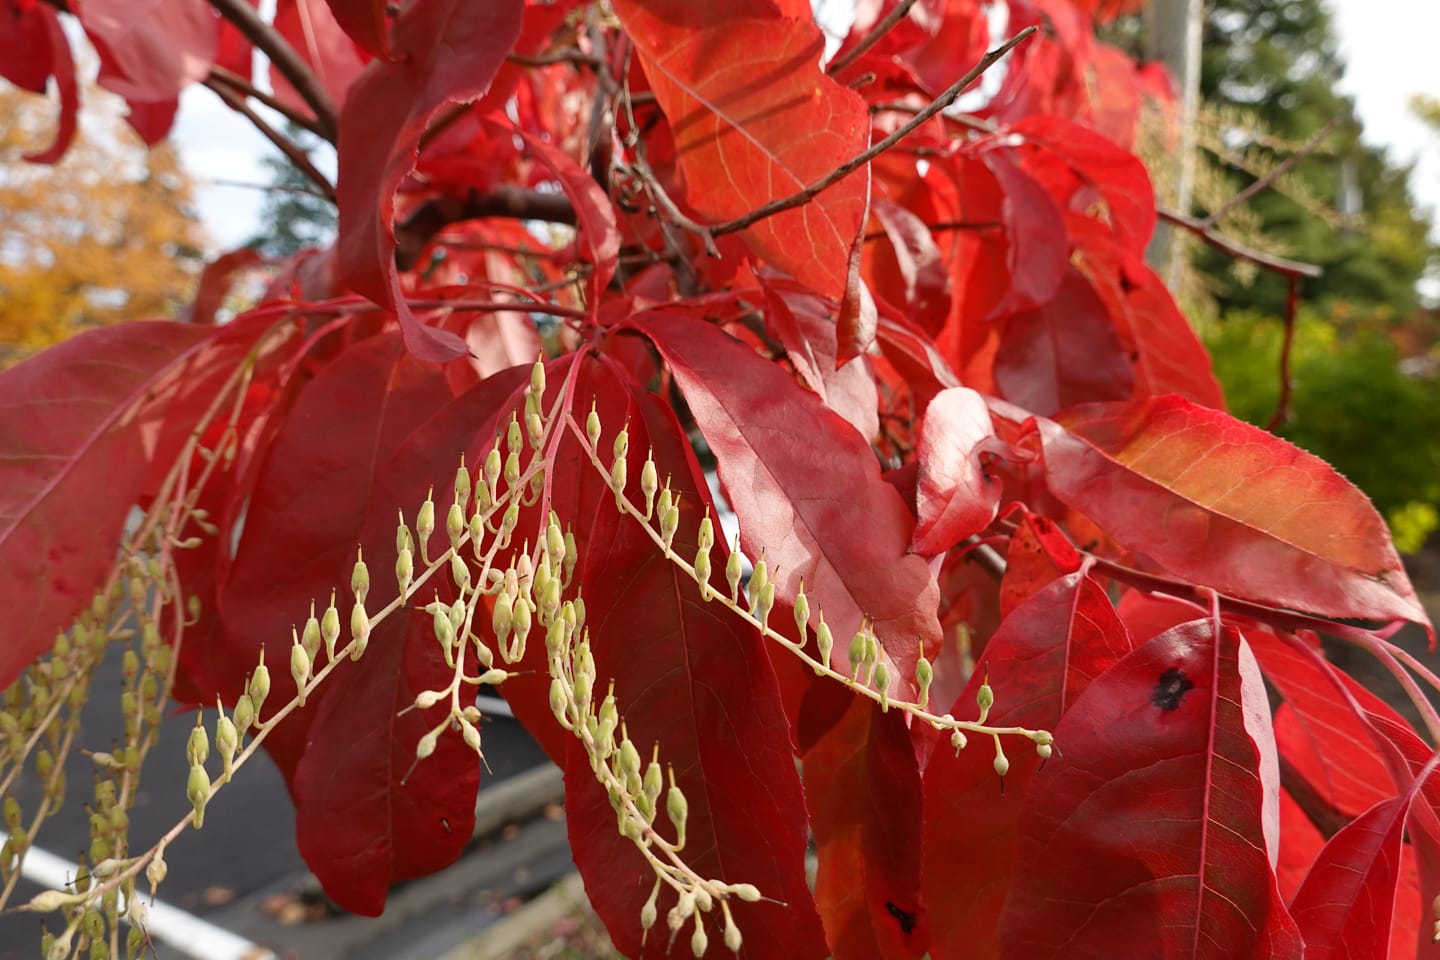 A close up of red leaves on a sourwood tree in the fall